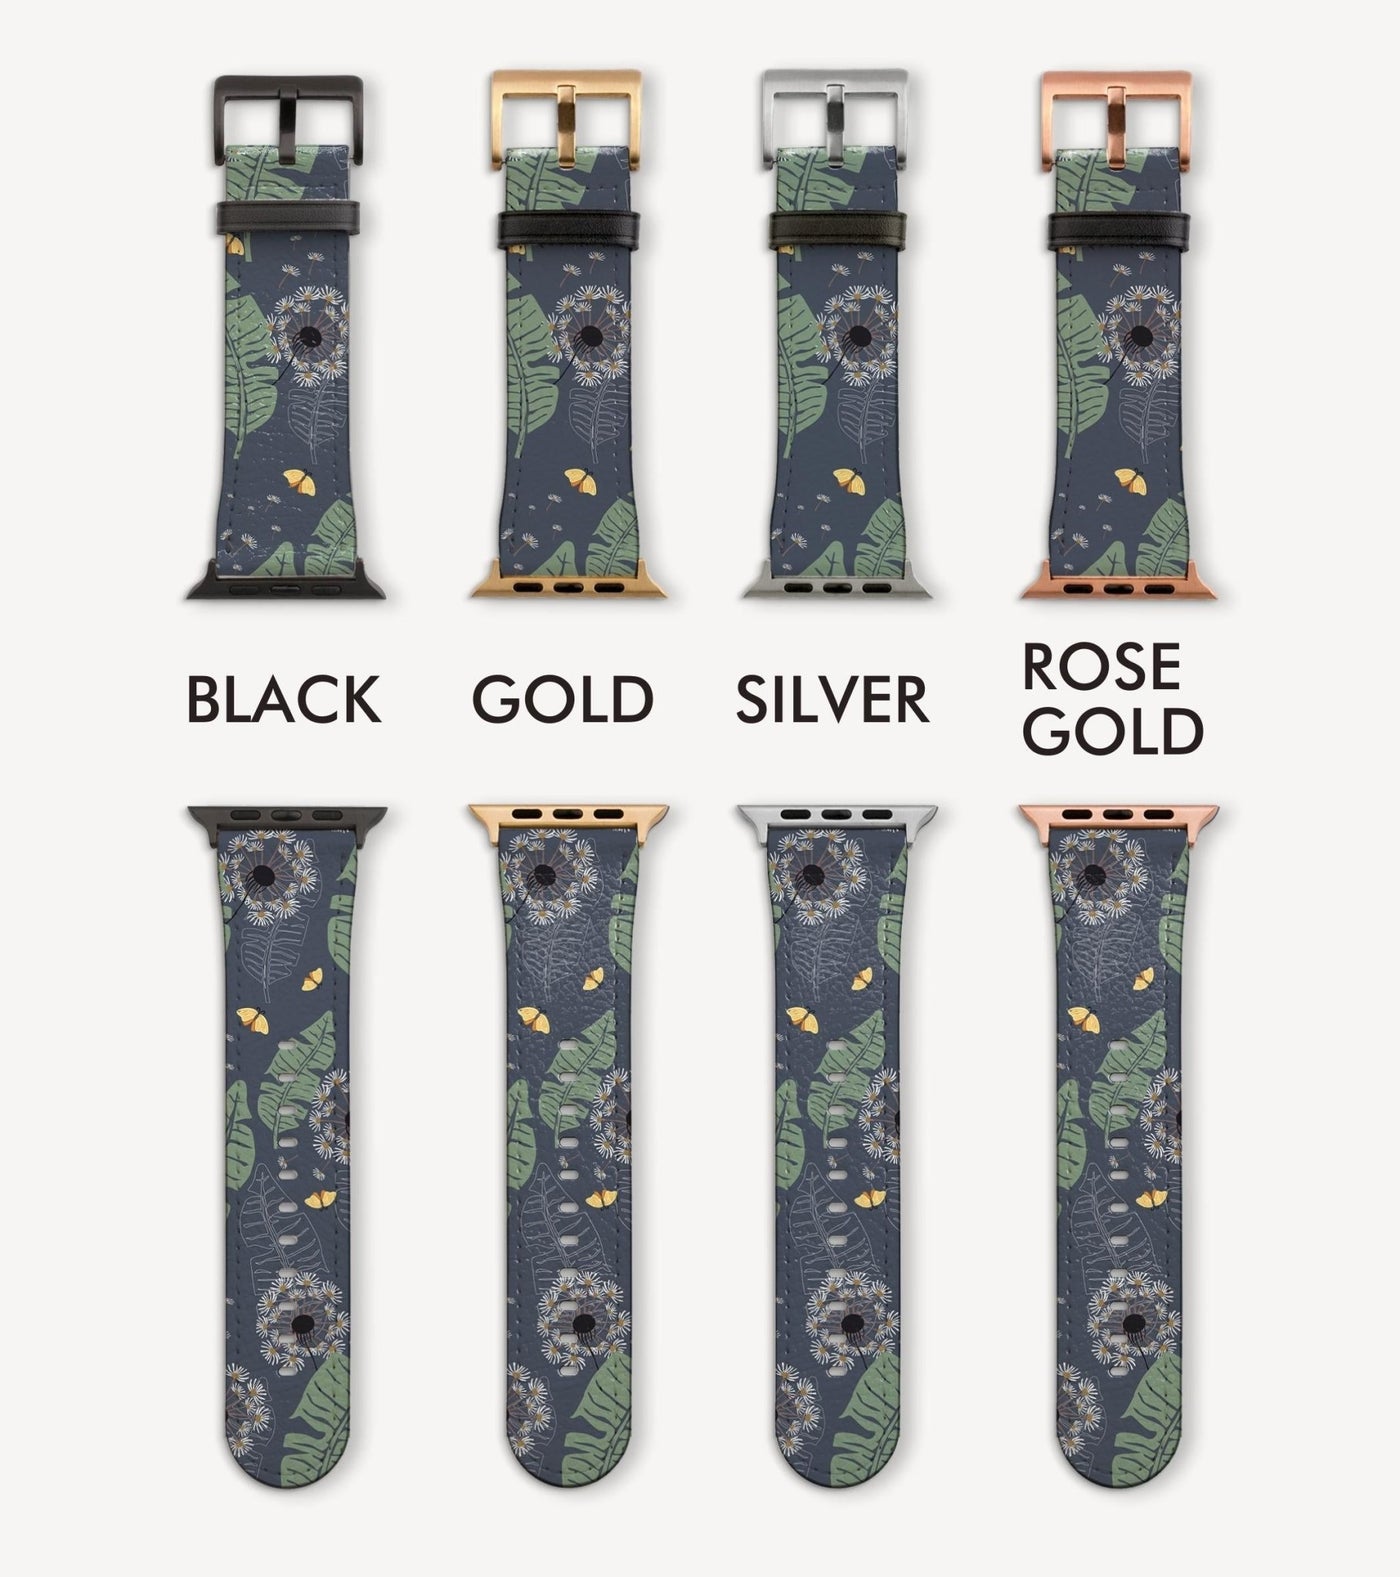 Rise with Dandelion - Apple Watch Band